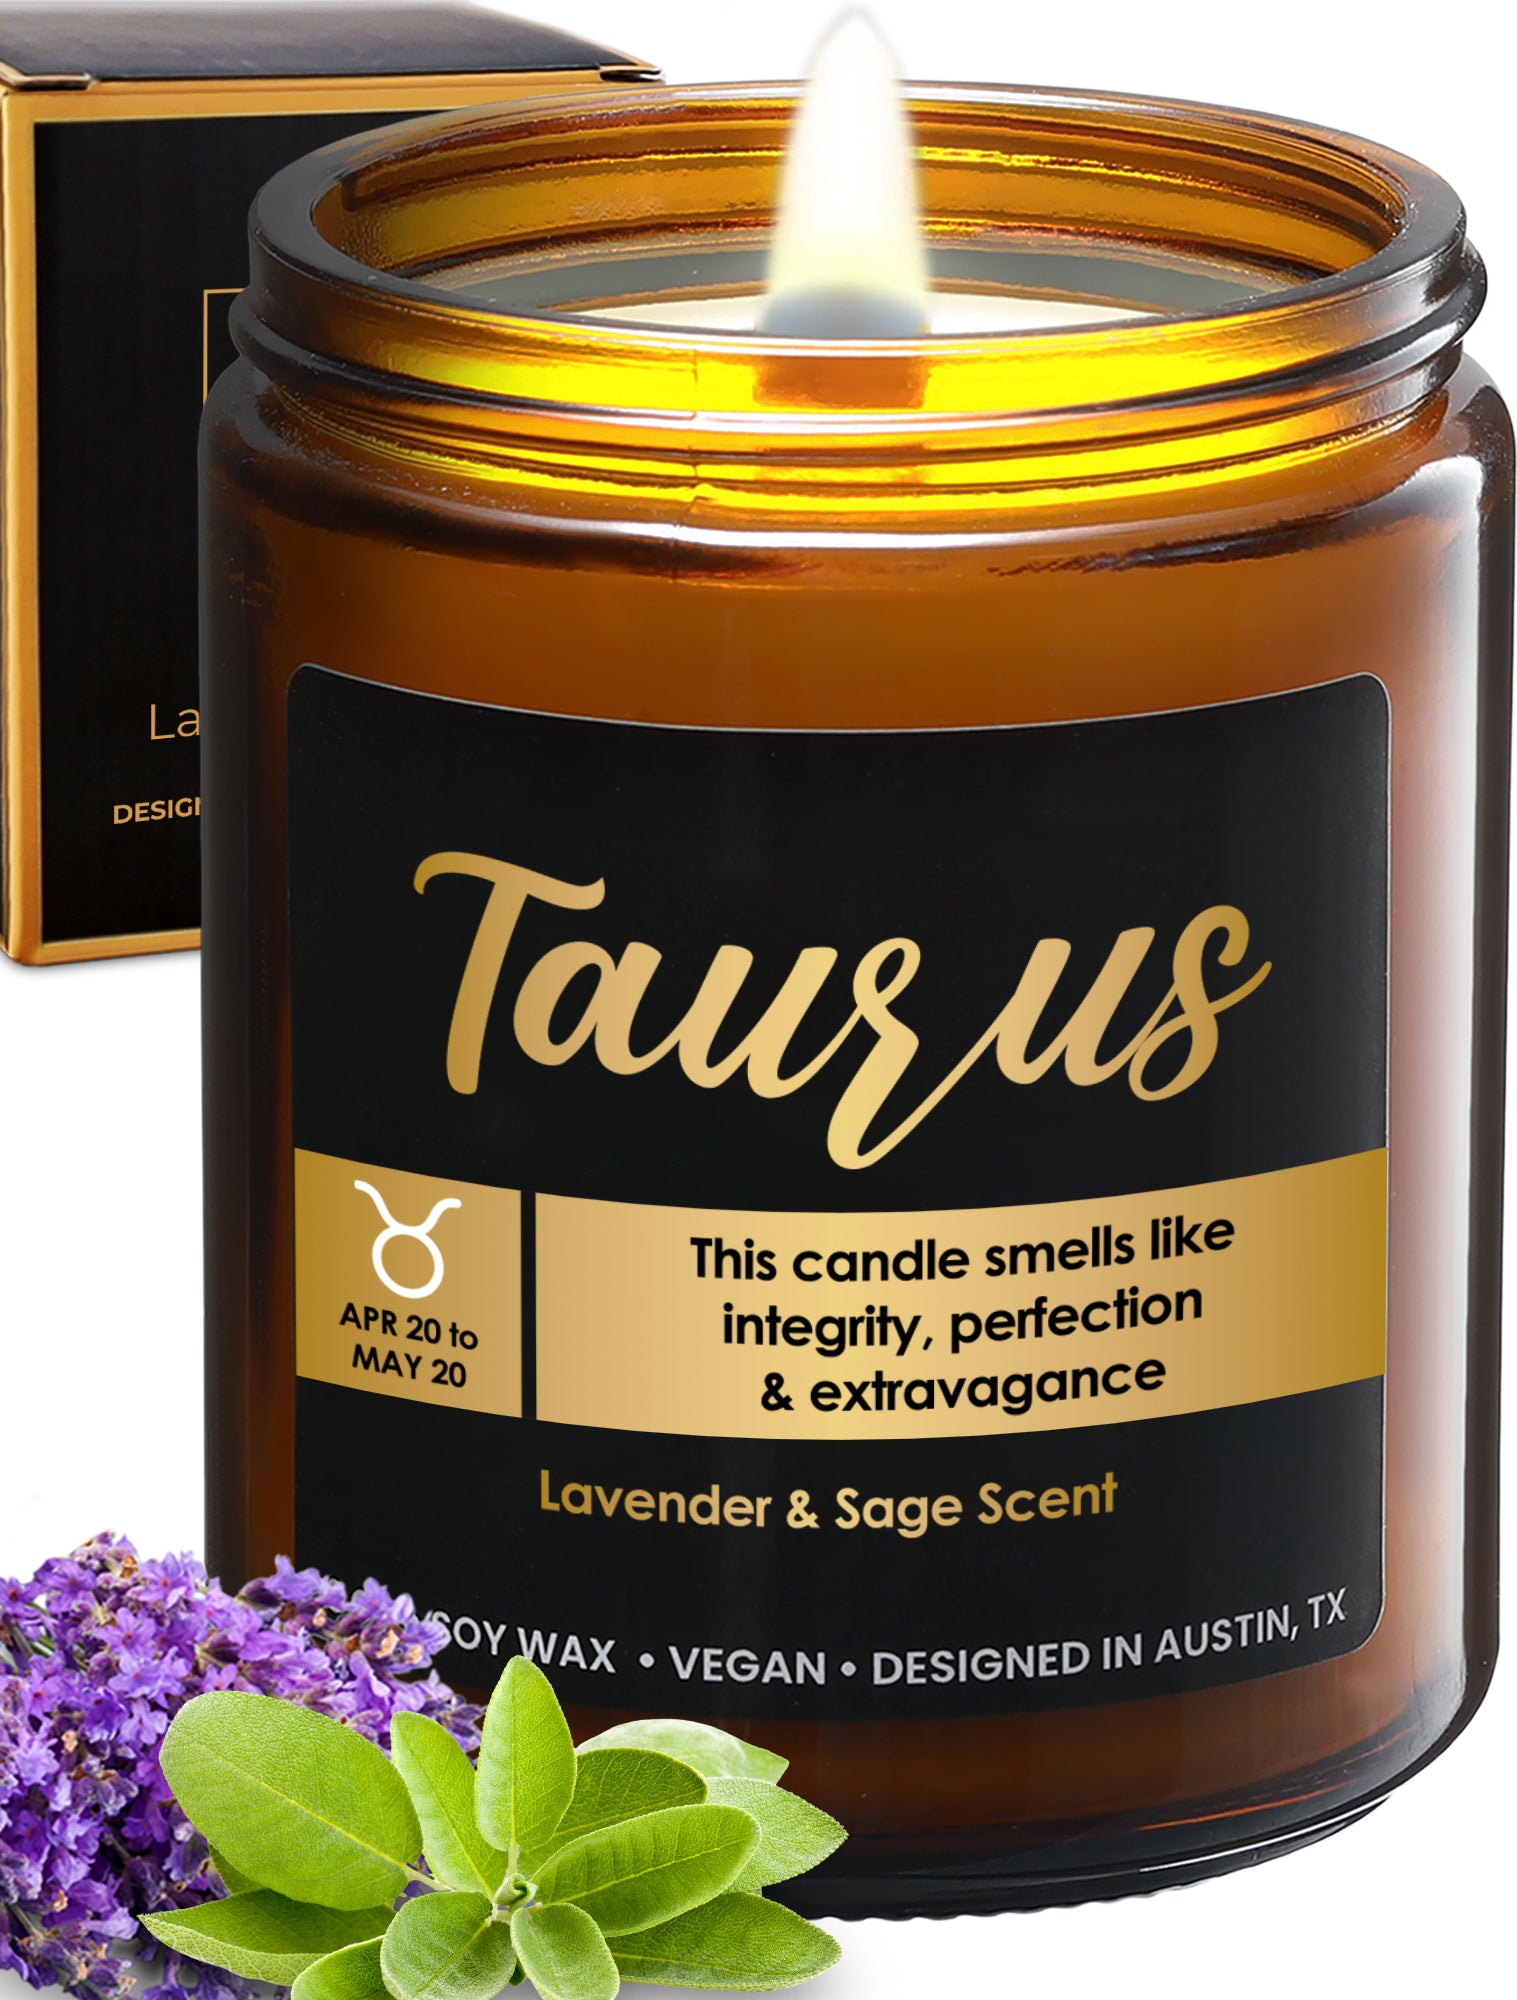 Taurus - Uncompromising - Zodiac Constellation Birthday Candle - Woodwick  Candle – BADWAX®